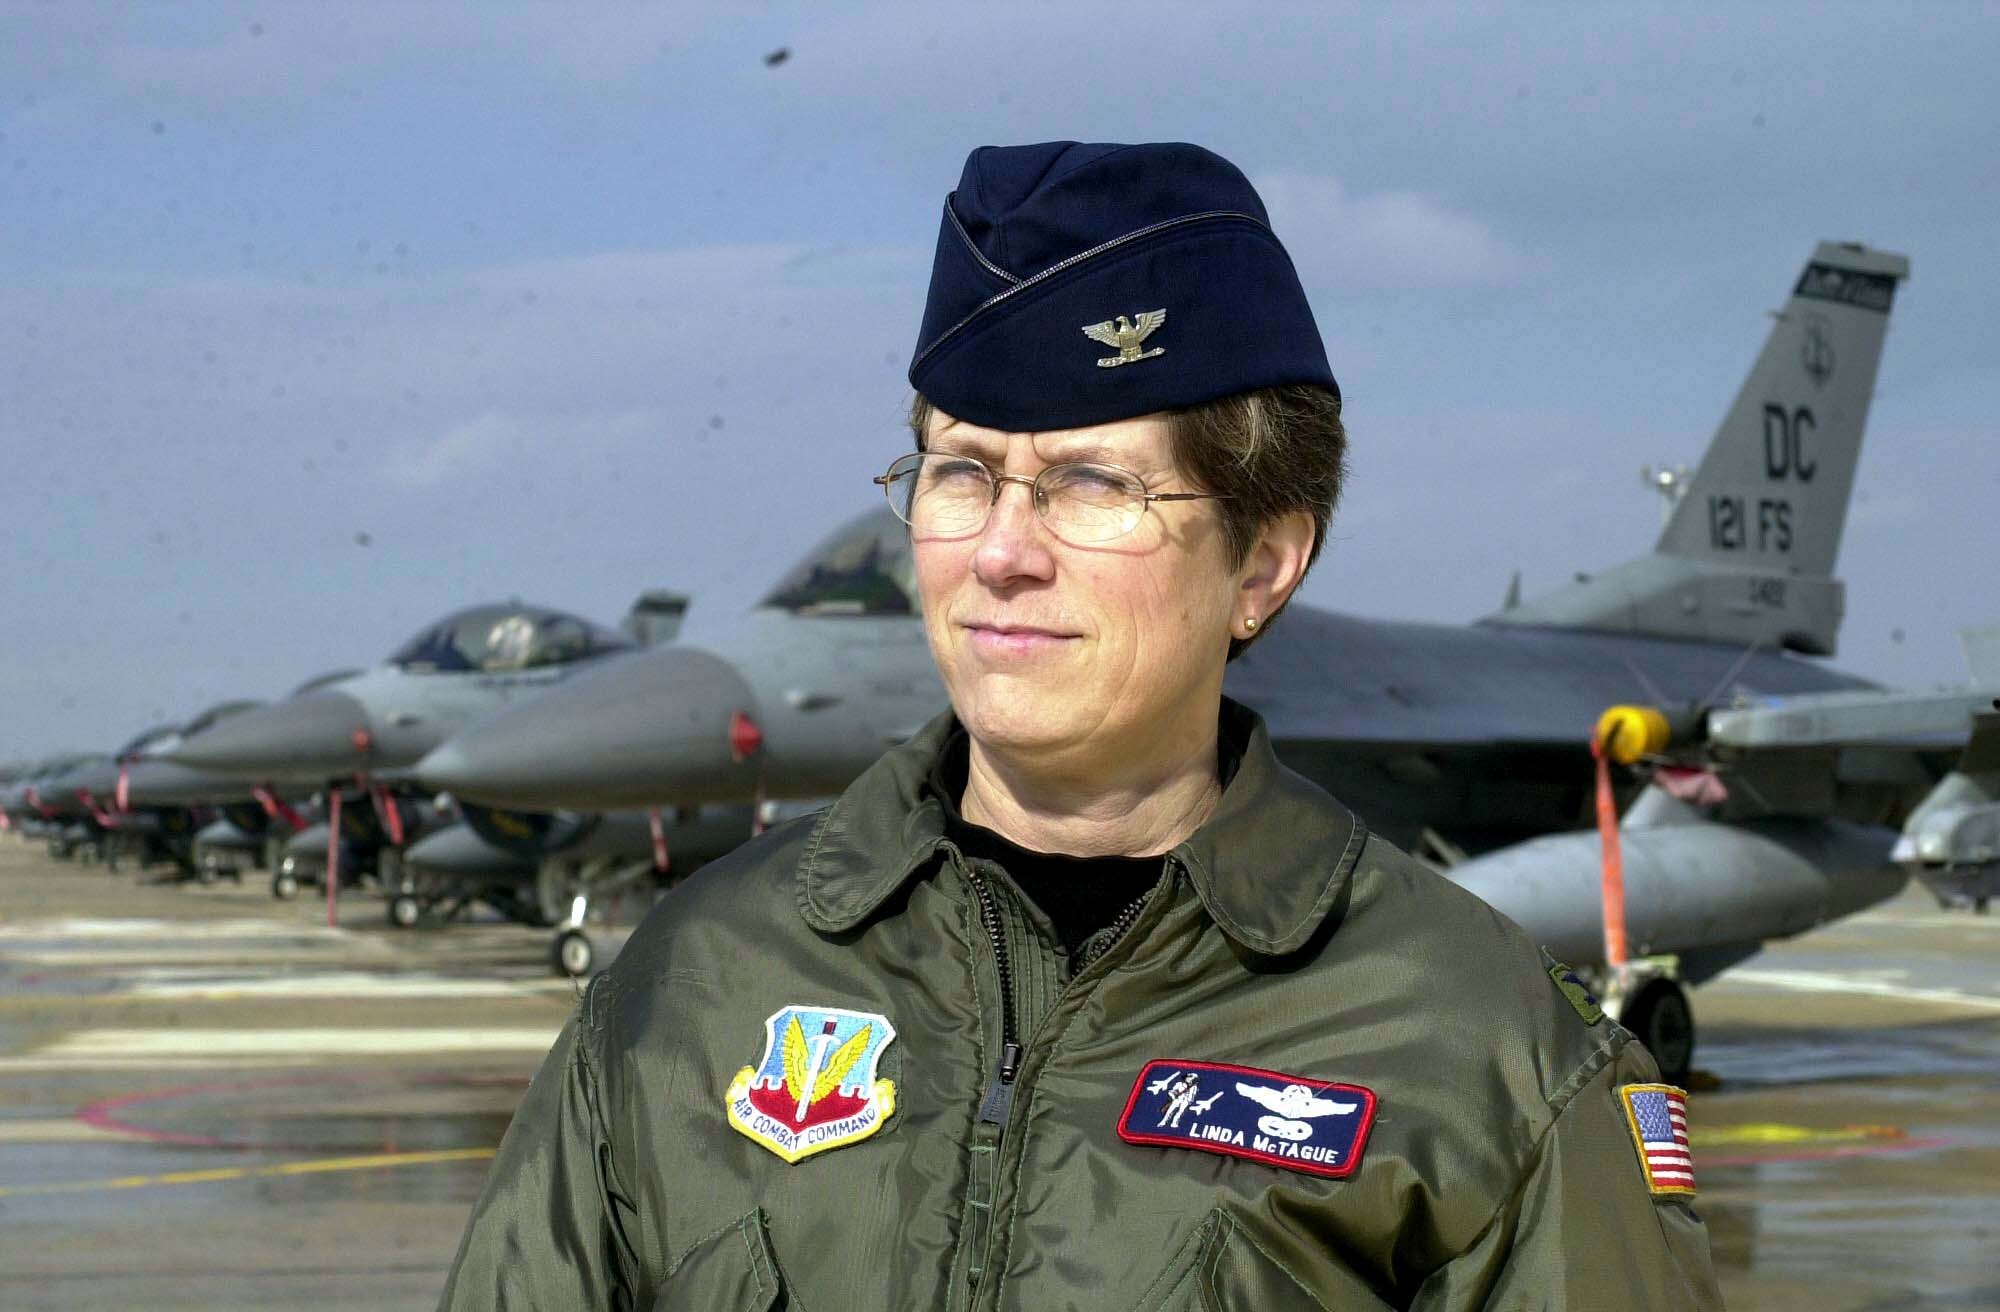 ANDREWS AIR FORCE BASE, Md. -- Air National Guard Col. Linda McTague is the first woman to command an ANG wing, and historical records show she is the first woman to command an Air Force fighter squadron.  (Courtesy photo)